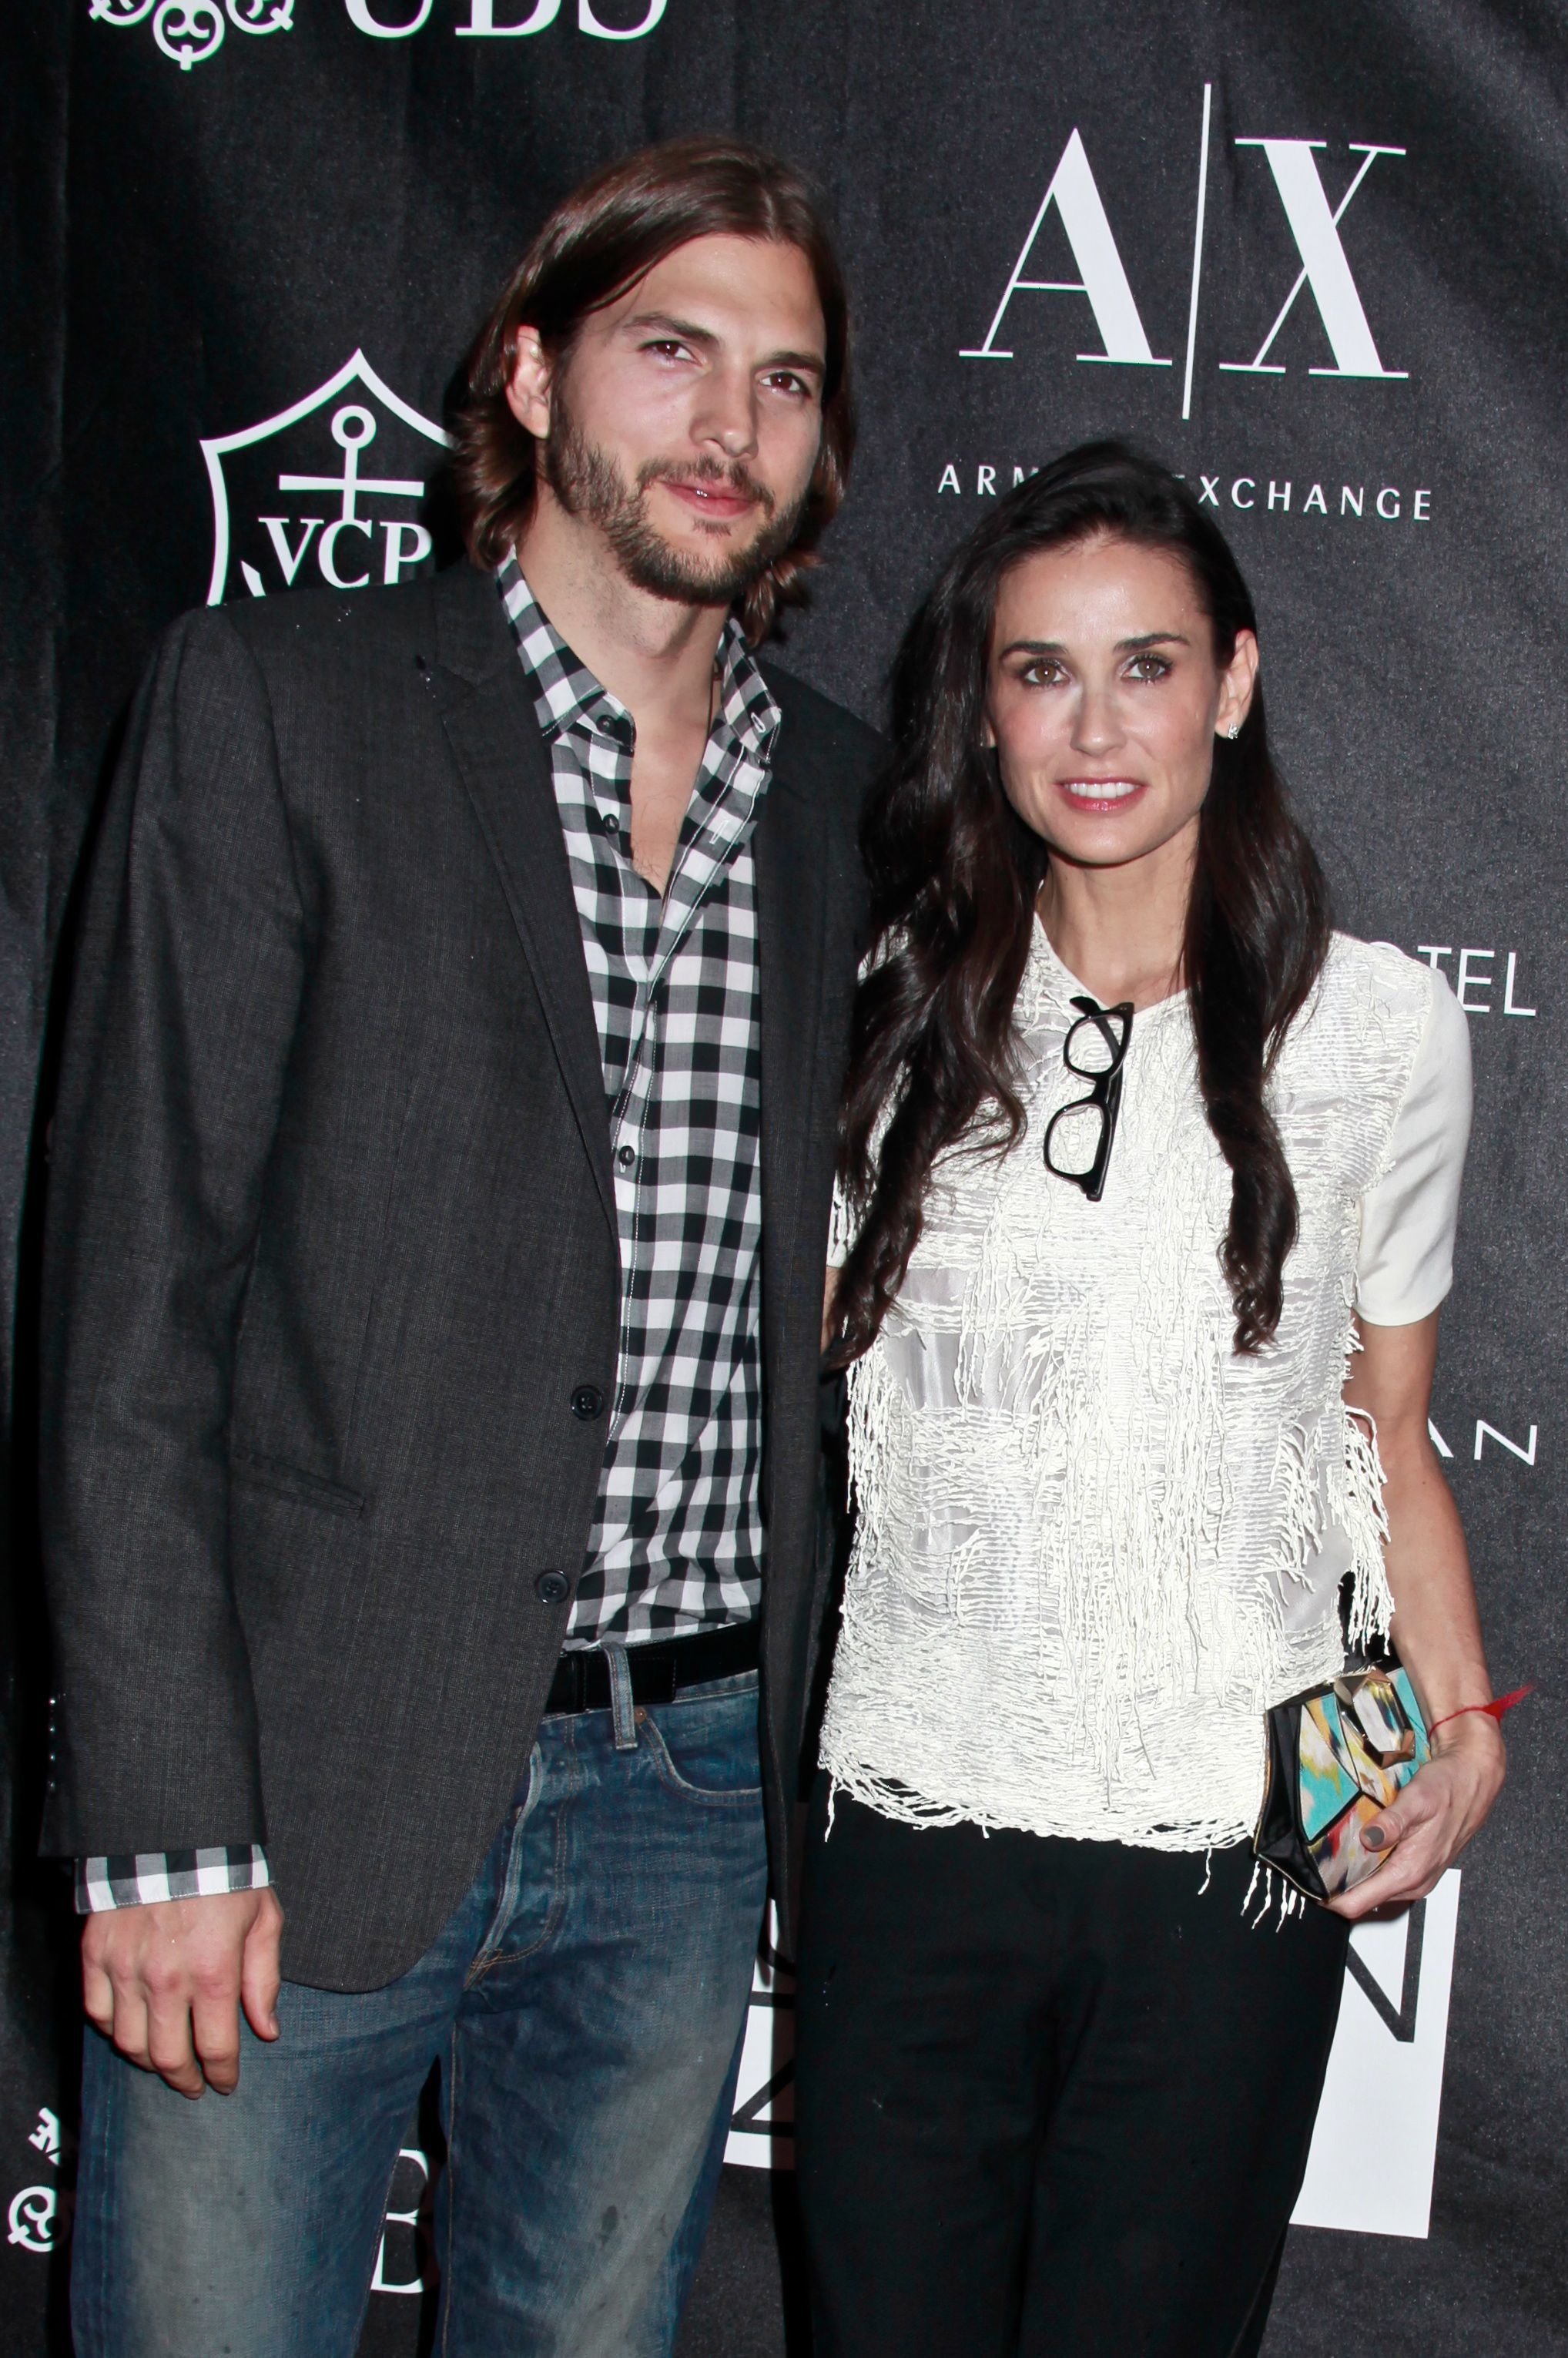 <p>Ashton Kutcher and Demi Moore's relationship exploded in 2011 after he was accused of cheating on his wife with a woman named Sara Leal -- who, it turns out, was Scott Eastwood's girlfriend at the time. "It is with great sadness and a heavy heart that I have decided to end my six-year marriage to Ashton," Moore said in a statement a few months after the scandal broke. "As a woman, a mother and a wife there are certain values and vows that I hold sacred, and it is in this spirit that I have chosen to move forward with my life." Ashton filed for divorce the following year. In 2019, Demi revealed in her memoir "Inside Out" that Ashton had indeed stepped out on her at least twice. She said they'd previously had threesomes -- "I wanted to show him how great and fun I could be," she explained, after "he expressed his fantasy of bringing a third person into our bed." However, "because we had brought in a third party into our relationship, Ashton said, that blurred the lines and, to some extent, justified what he's done," she wrote.</p>